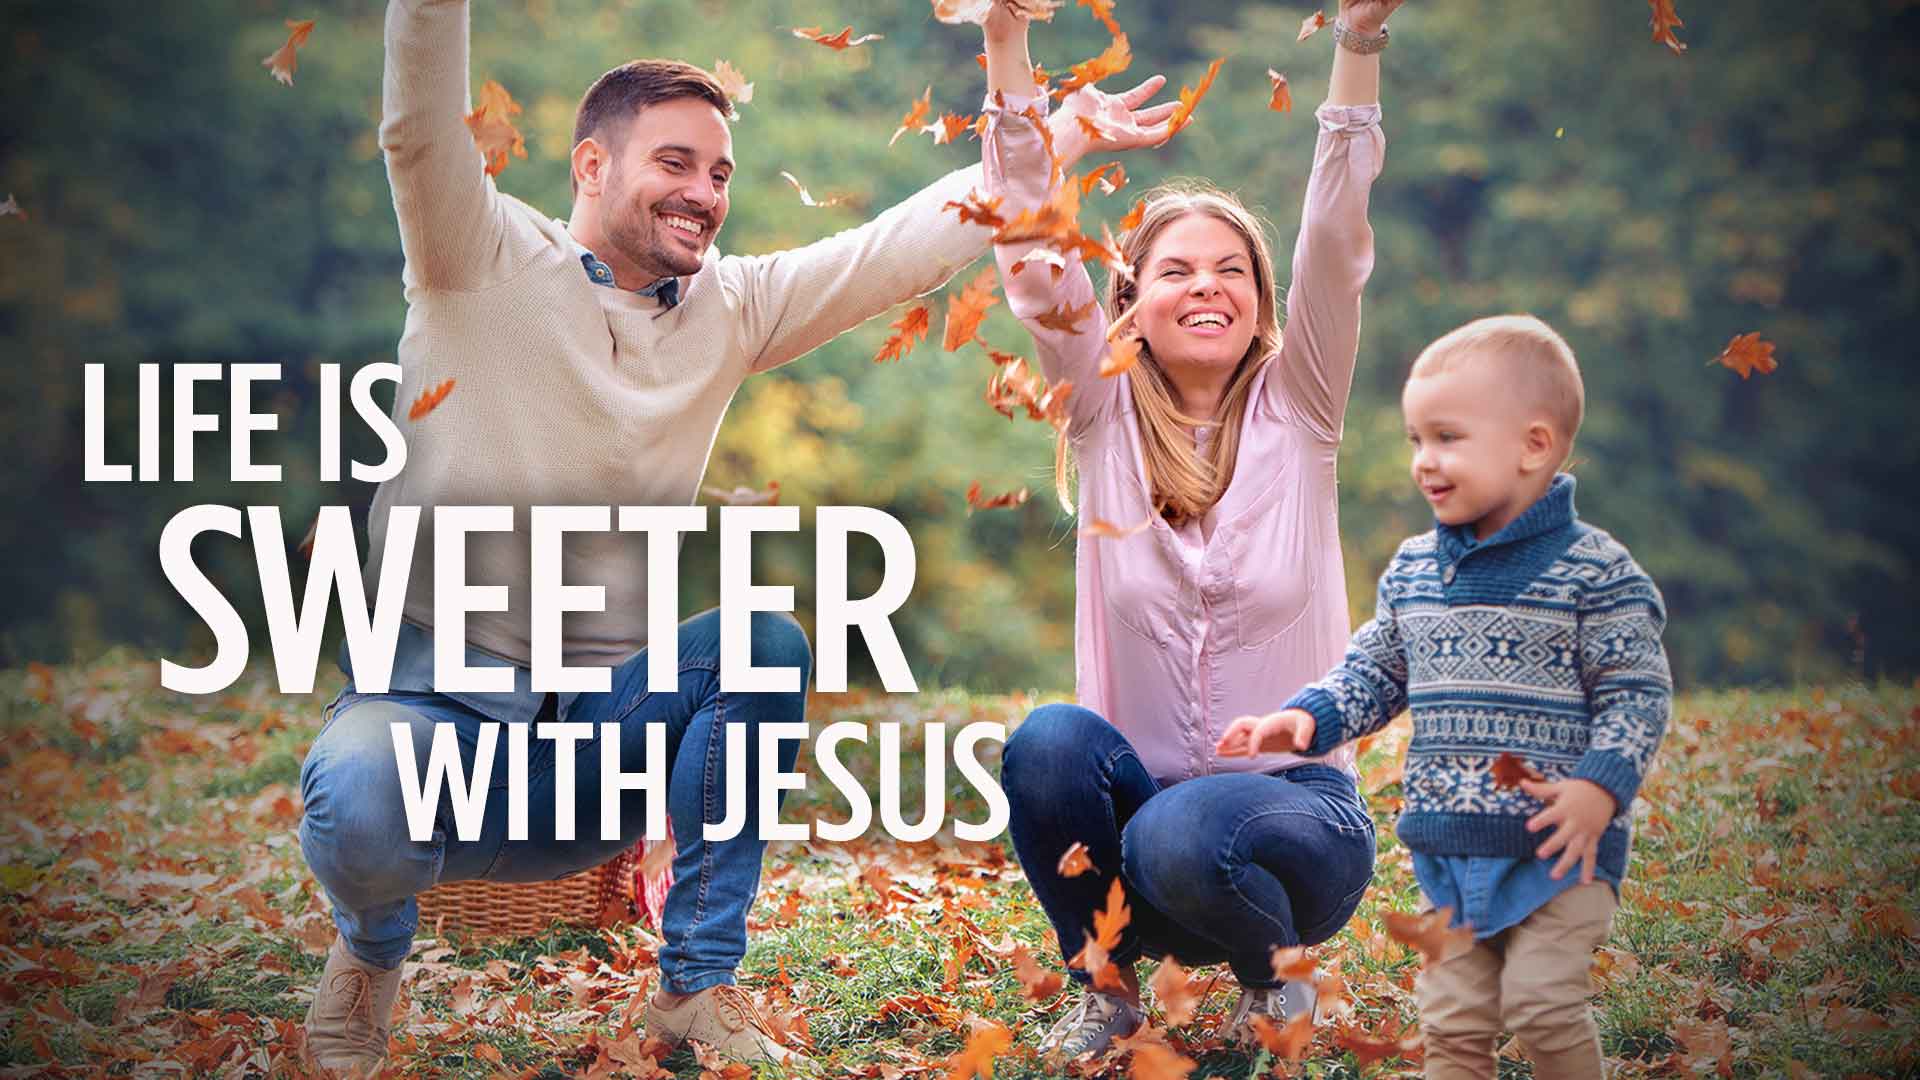 Life is Sweeter With Jesus 1920x1080